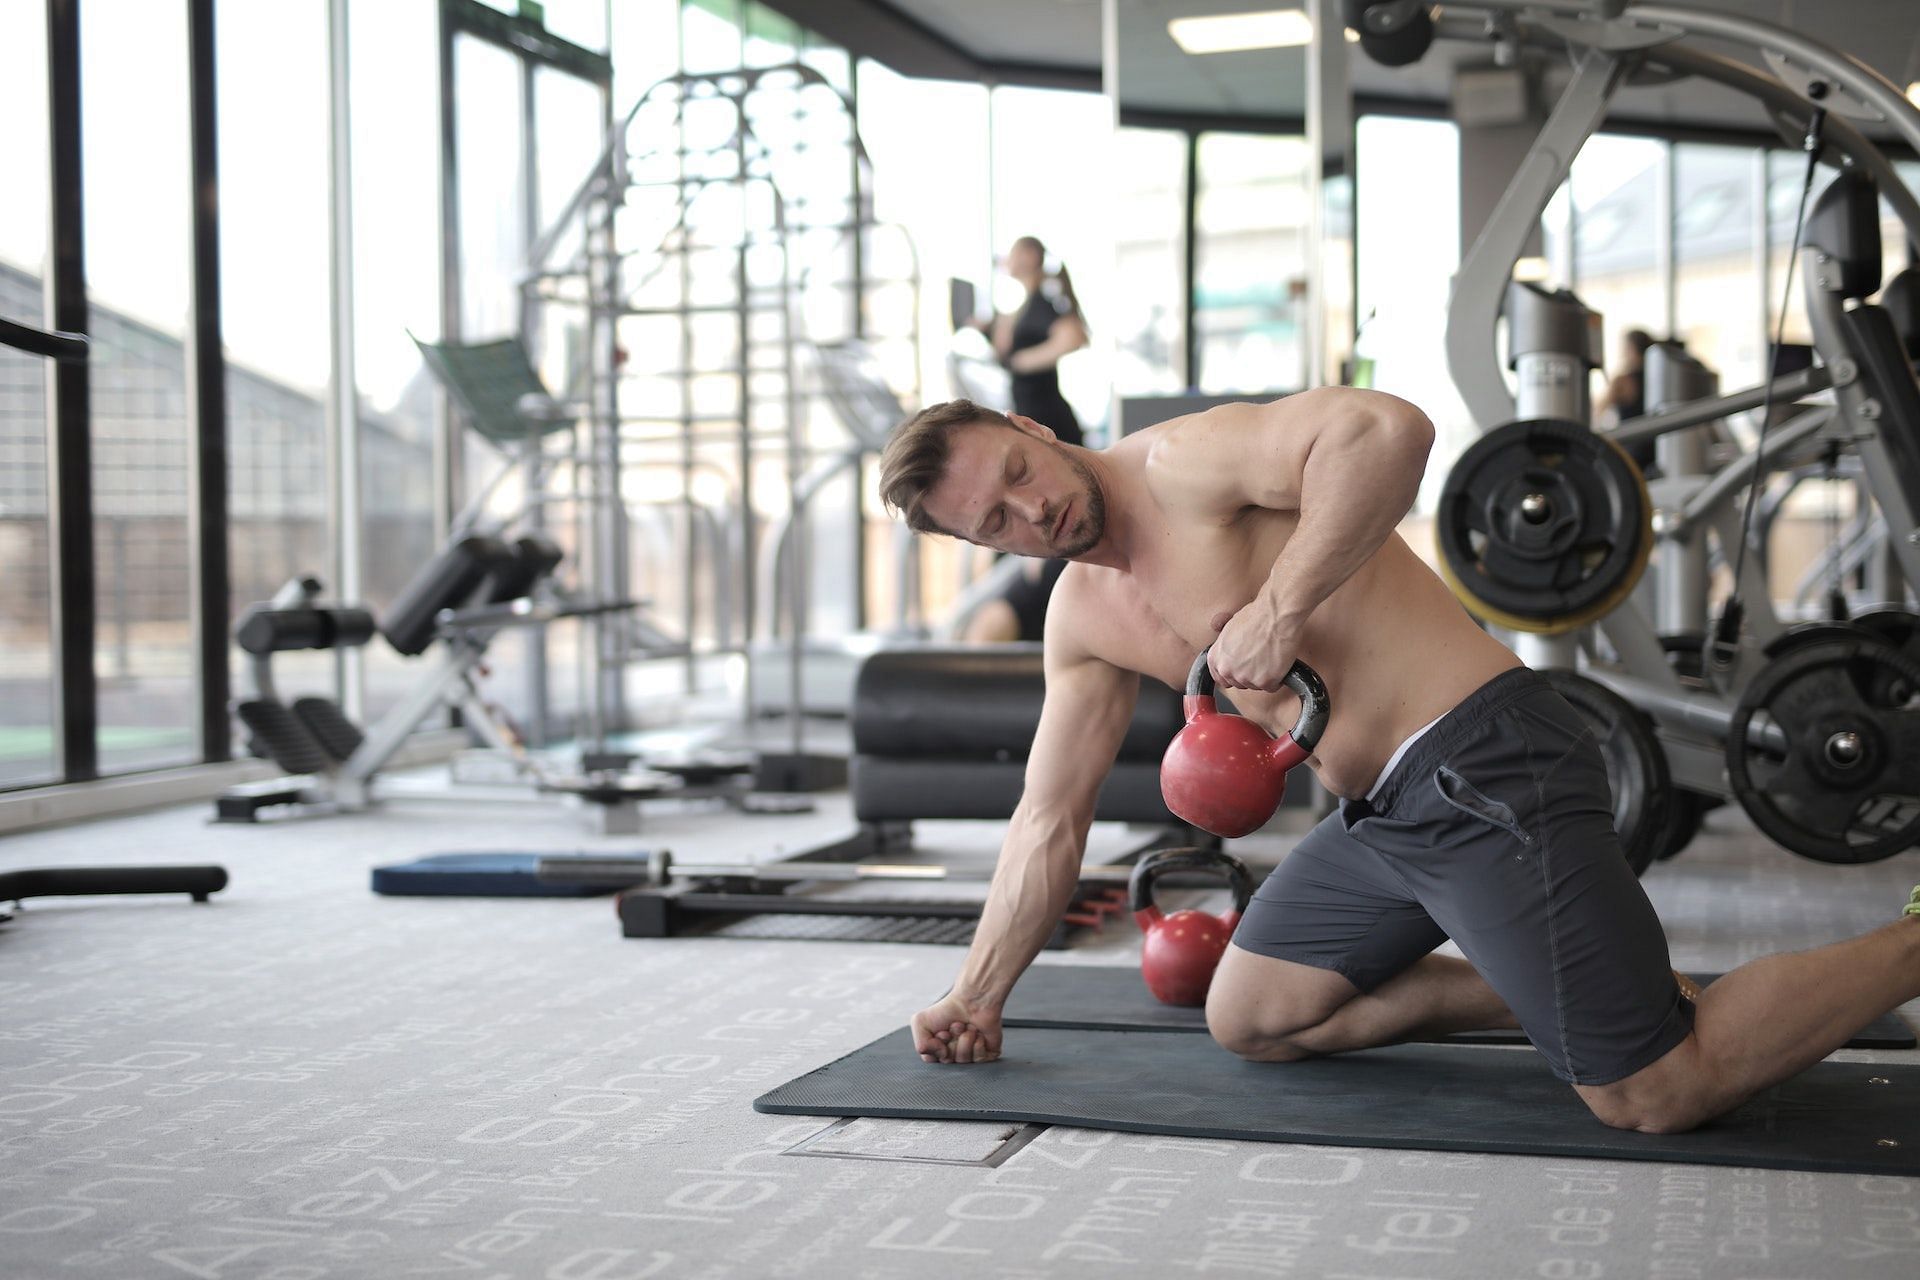 Weighted arm exercises help build huge arms. (Photo via Pexels/Andrea Piacquadio)